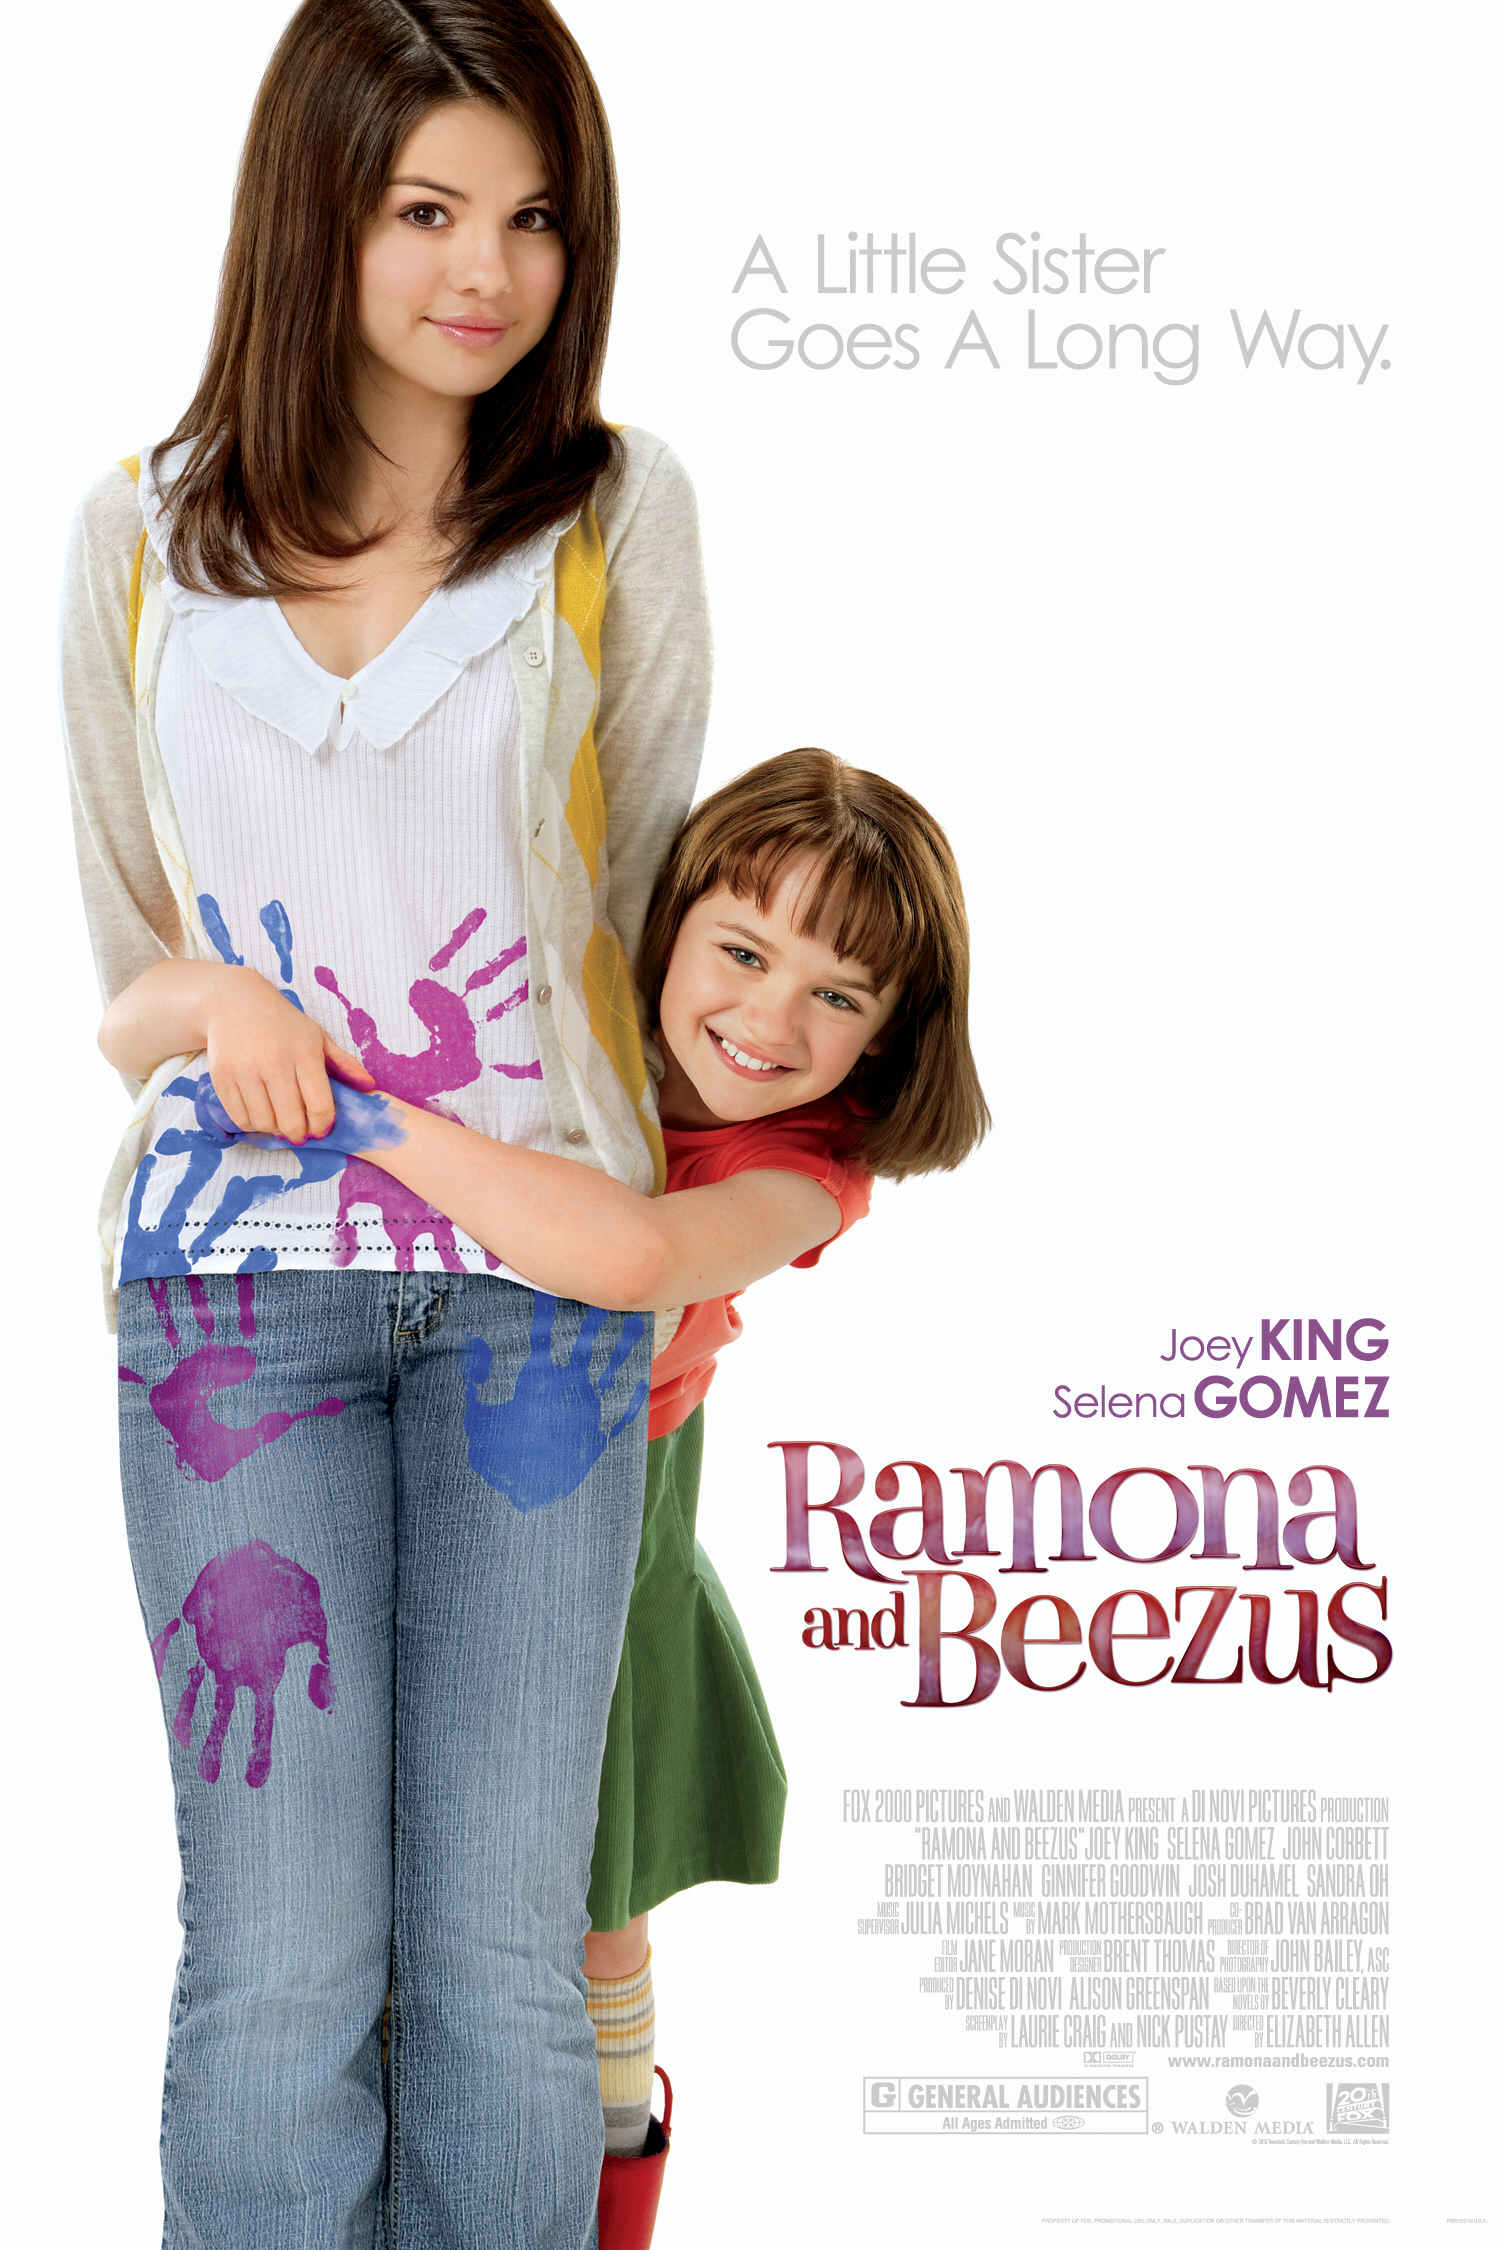 http://www.reviewstl.com/wp-content/uploads/2010/07/Ramona-and-Beezus-Movie-Poster-Large.jpg